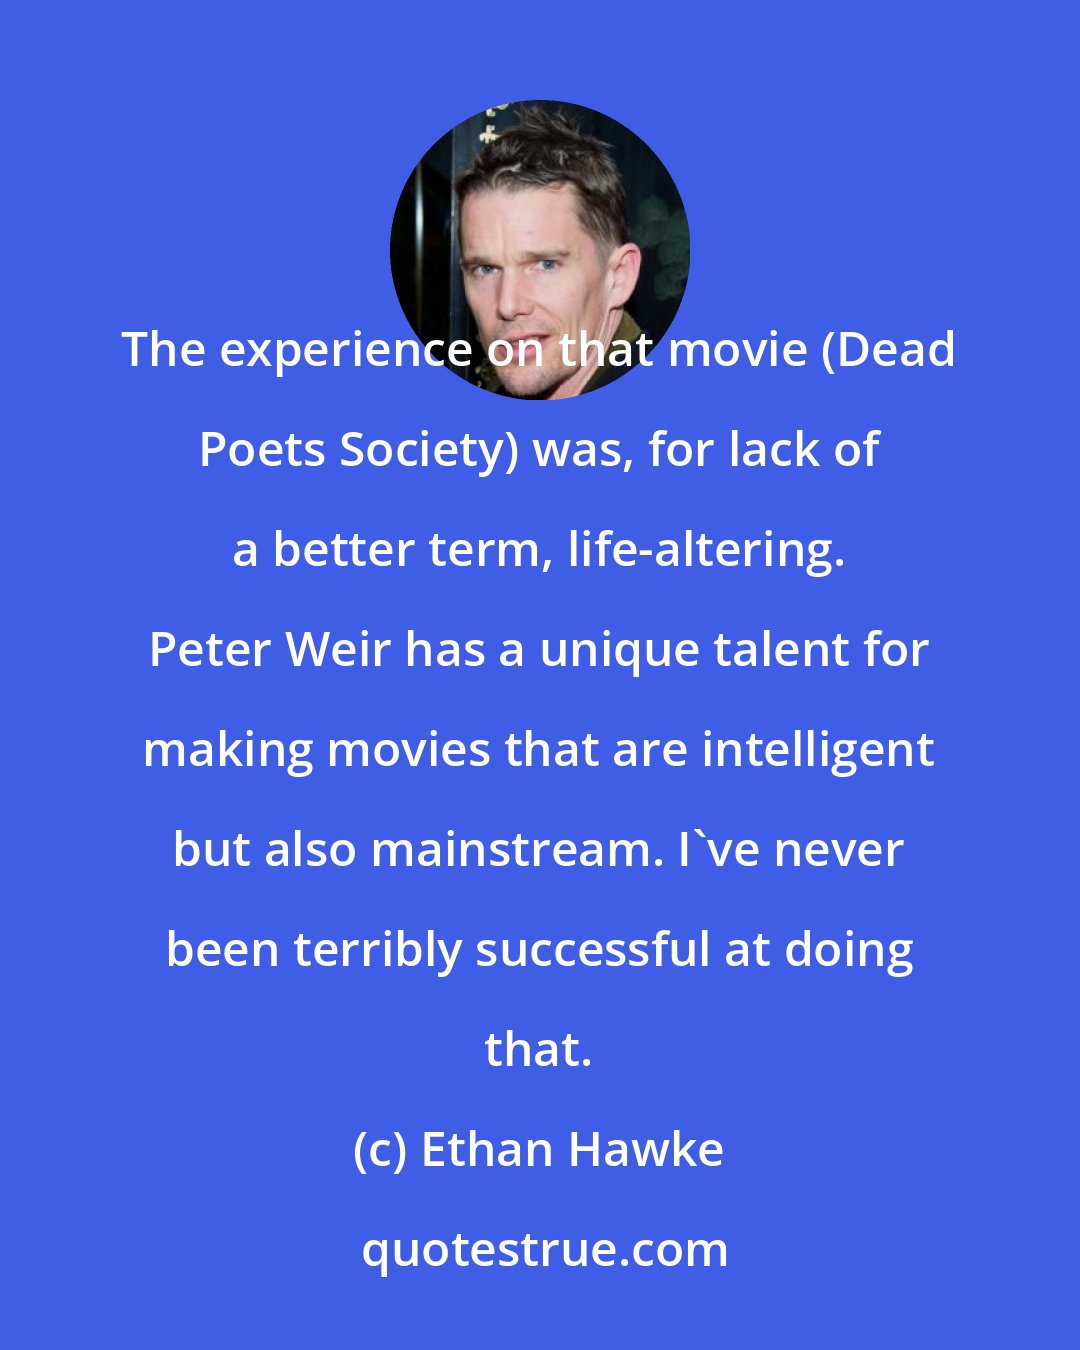 Ethan Hawke: The experience on that movie (Dead Poets Society) was, for lack of a better term, life-altering. Peter Weir has a unique talent for making movies that are intelligent but also mainstream. I've never been terribly successful at doing that.